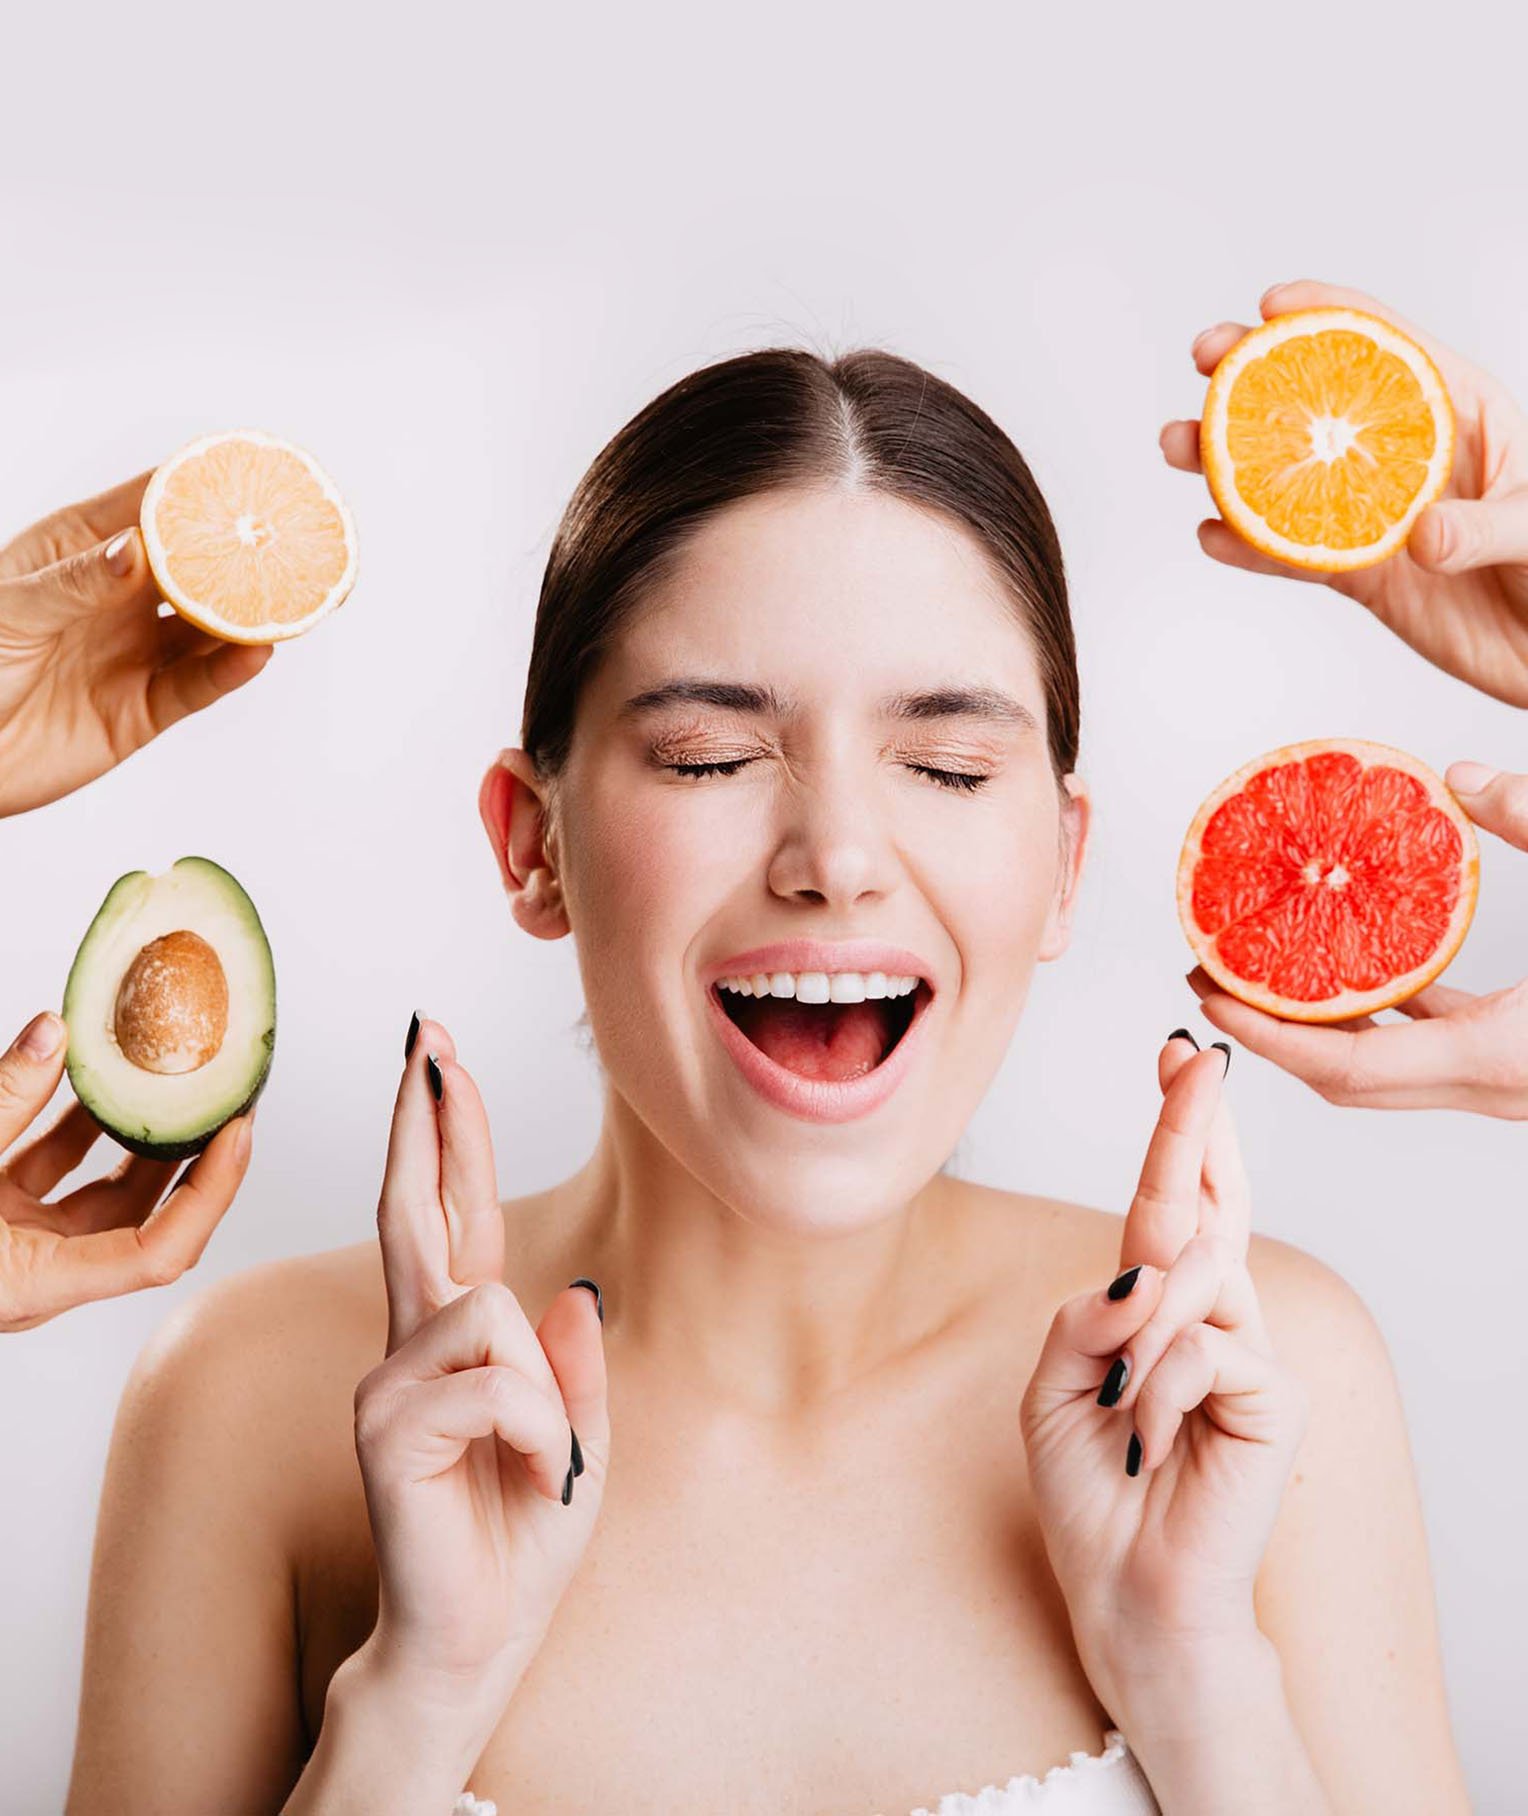 Top 12 Must-Have Foods for Glowing Skin